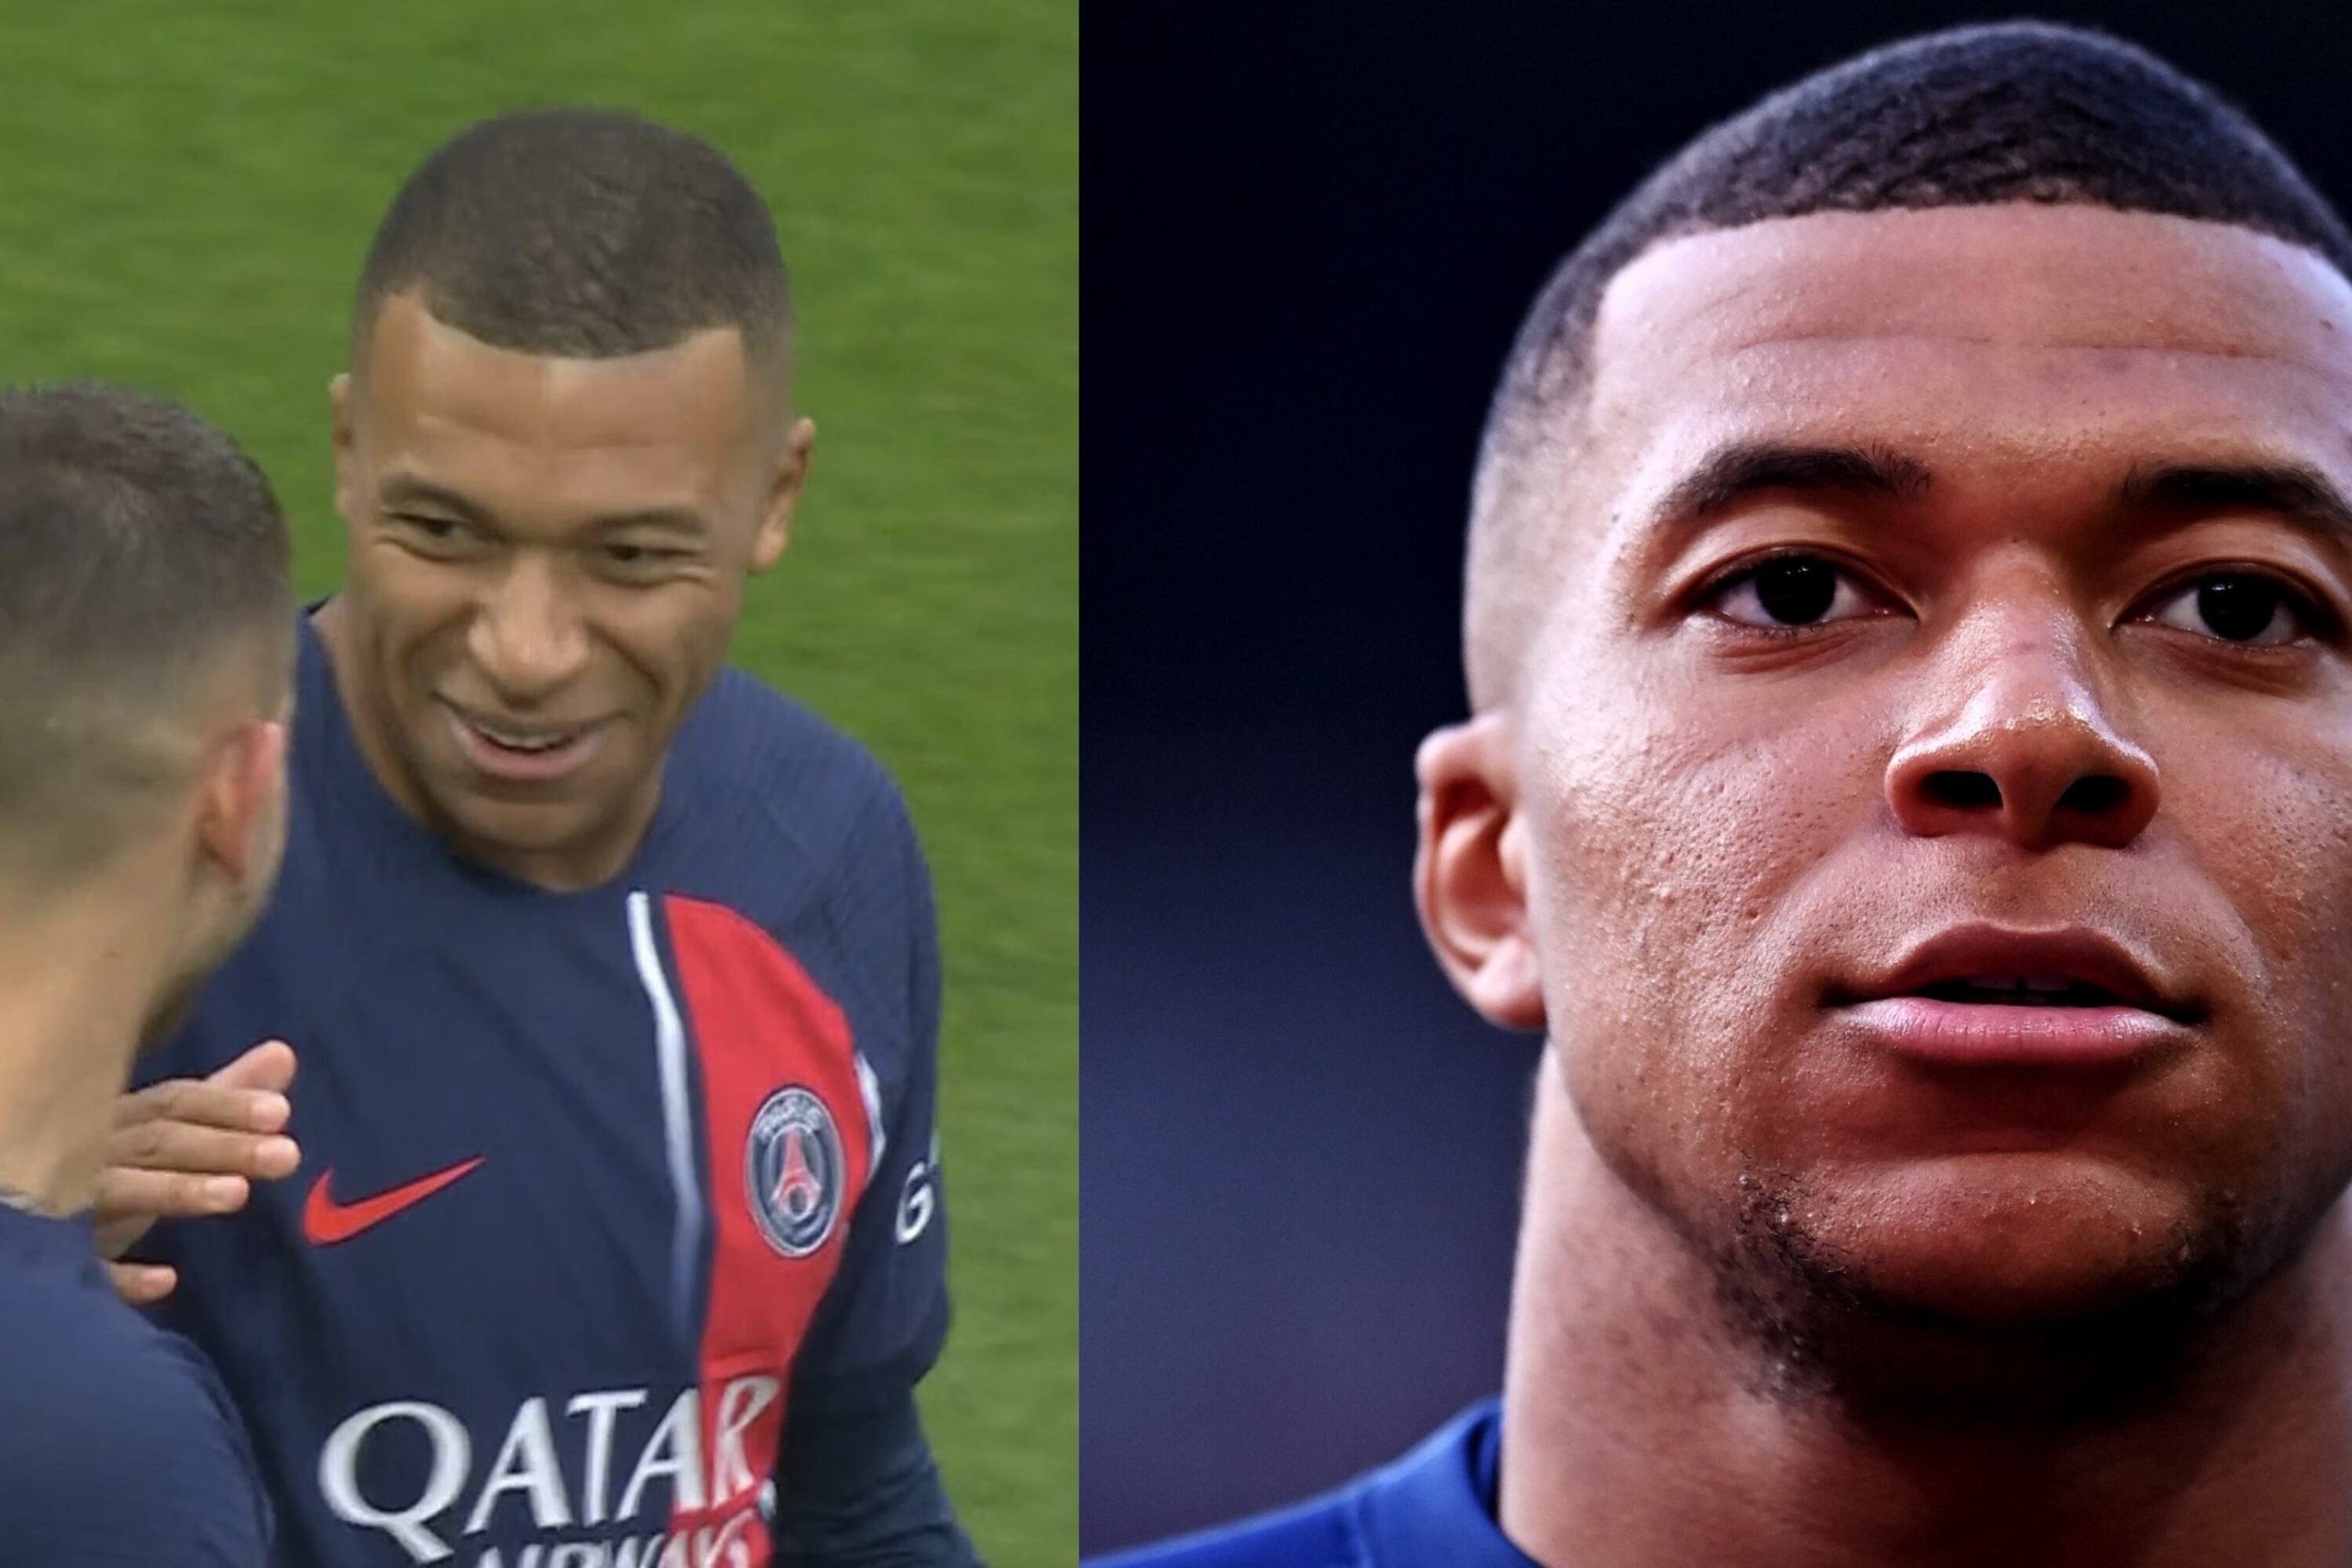 Drama once again, Mbappé gets into a controversy after talking about money